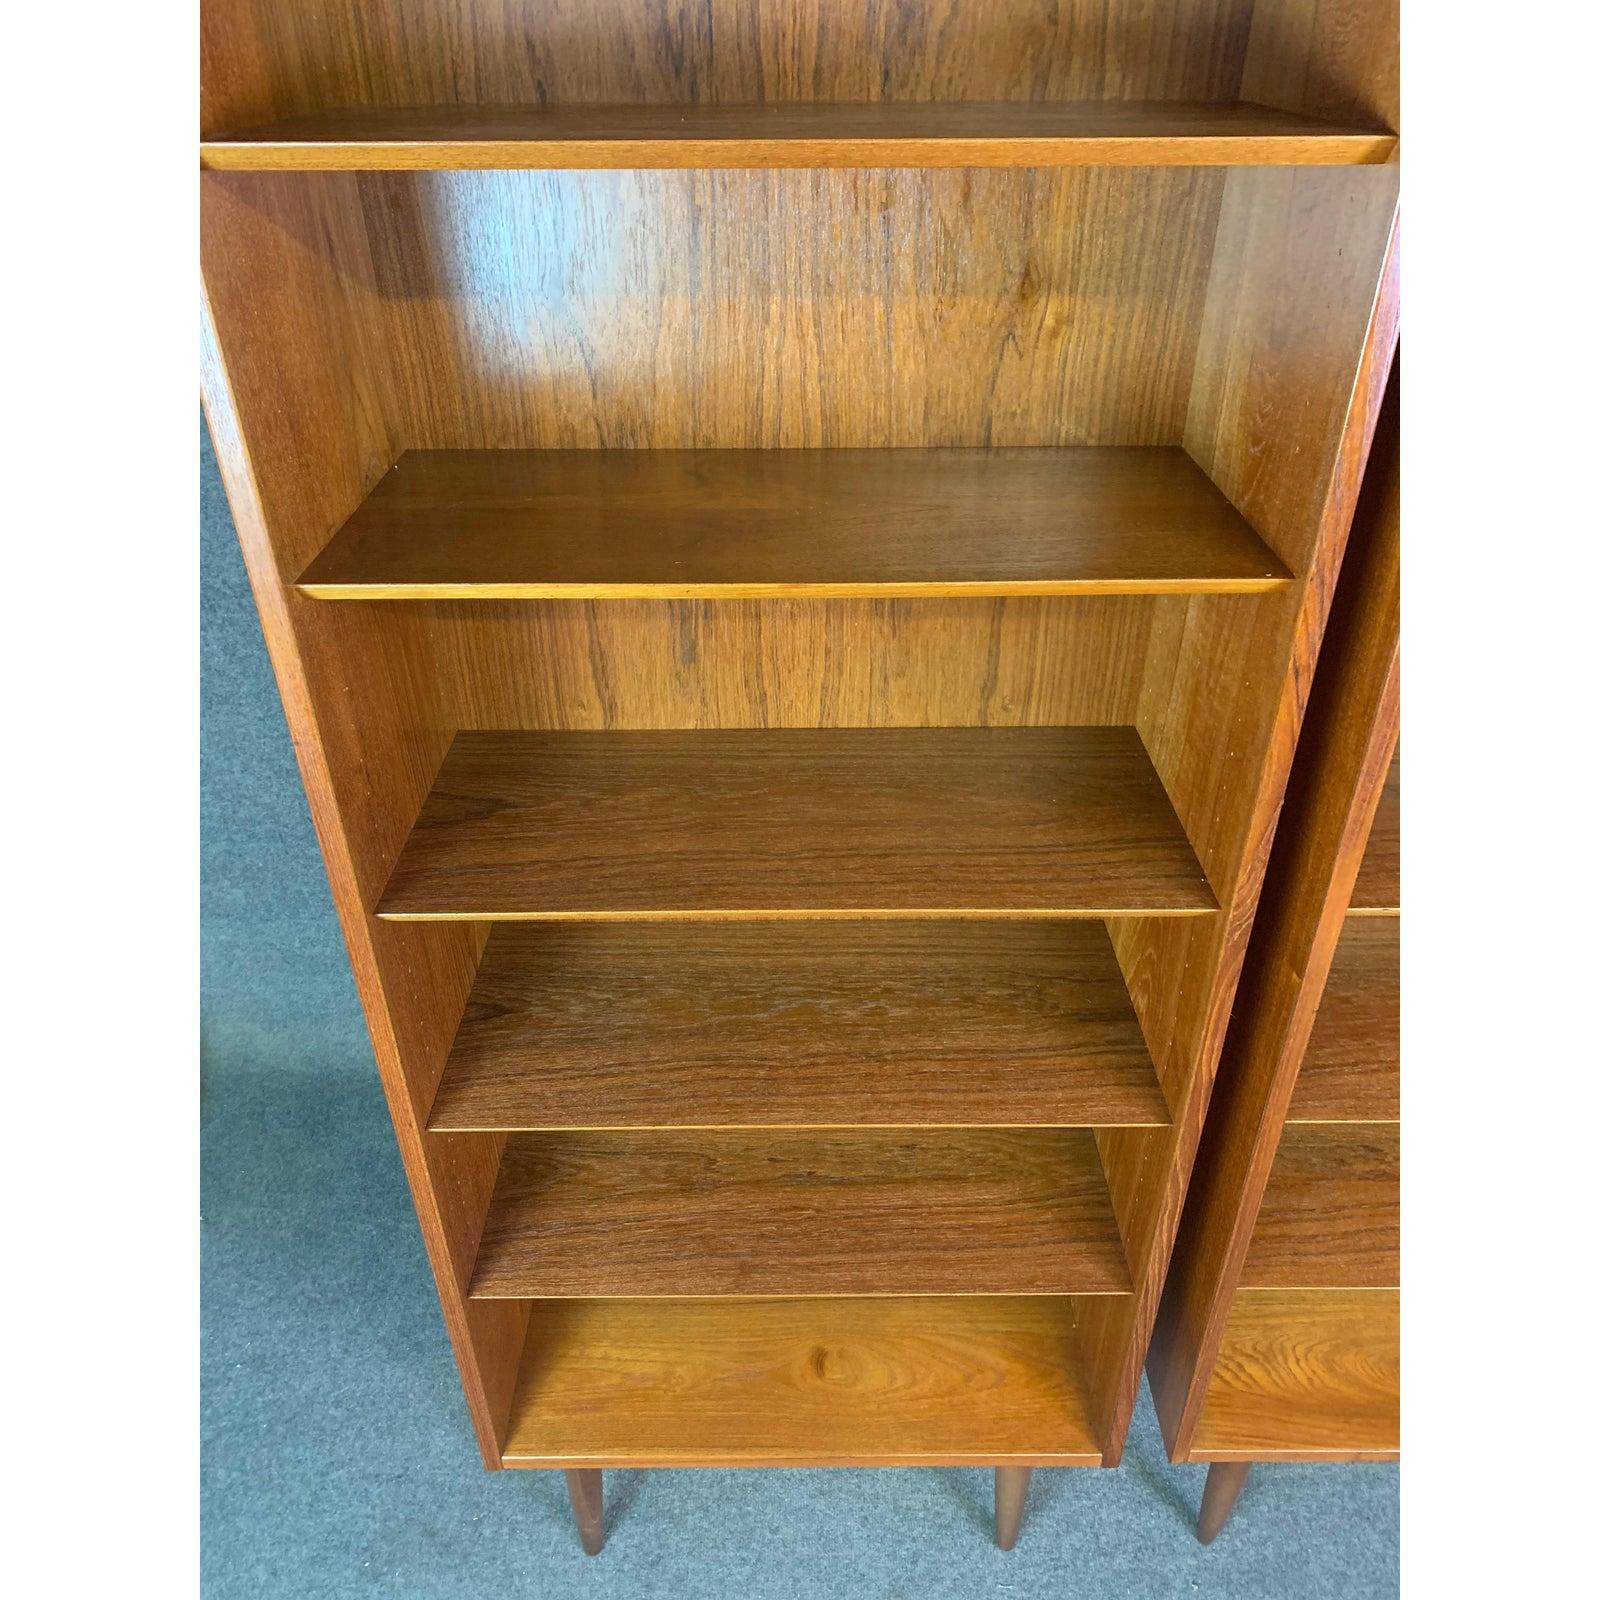 Here is a beautiful set of two large bookcases in teak wood manufactured in the 1960s in Denmark by Poul Hundevad.
These recently refinished bookshelves features a vibrant wood grain, 6 shelves (5 adjustable) and four tapered legs.
Excellent